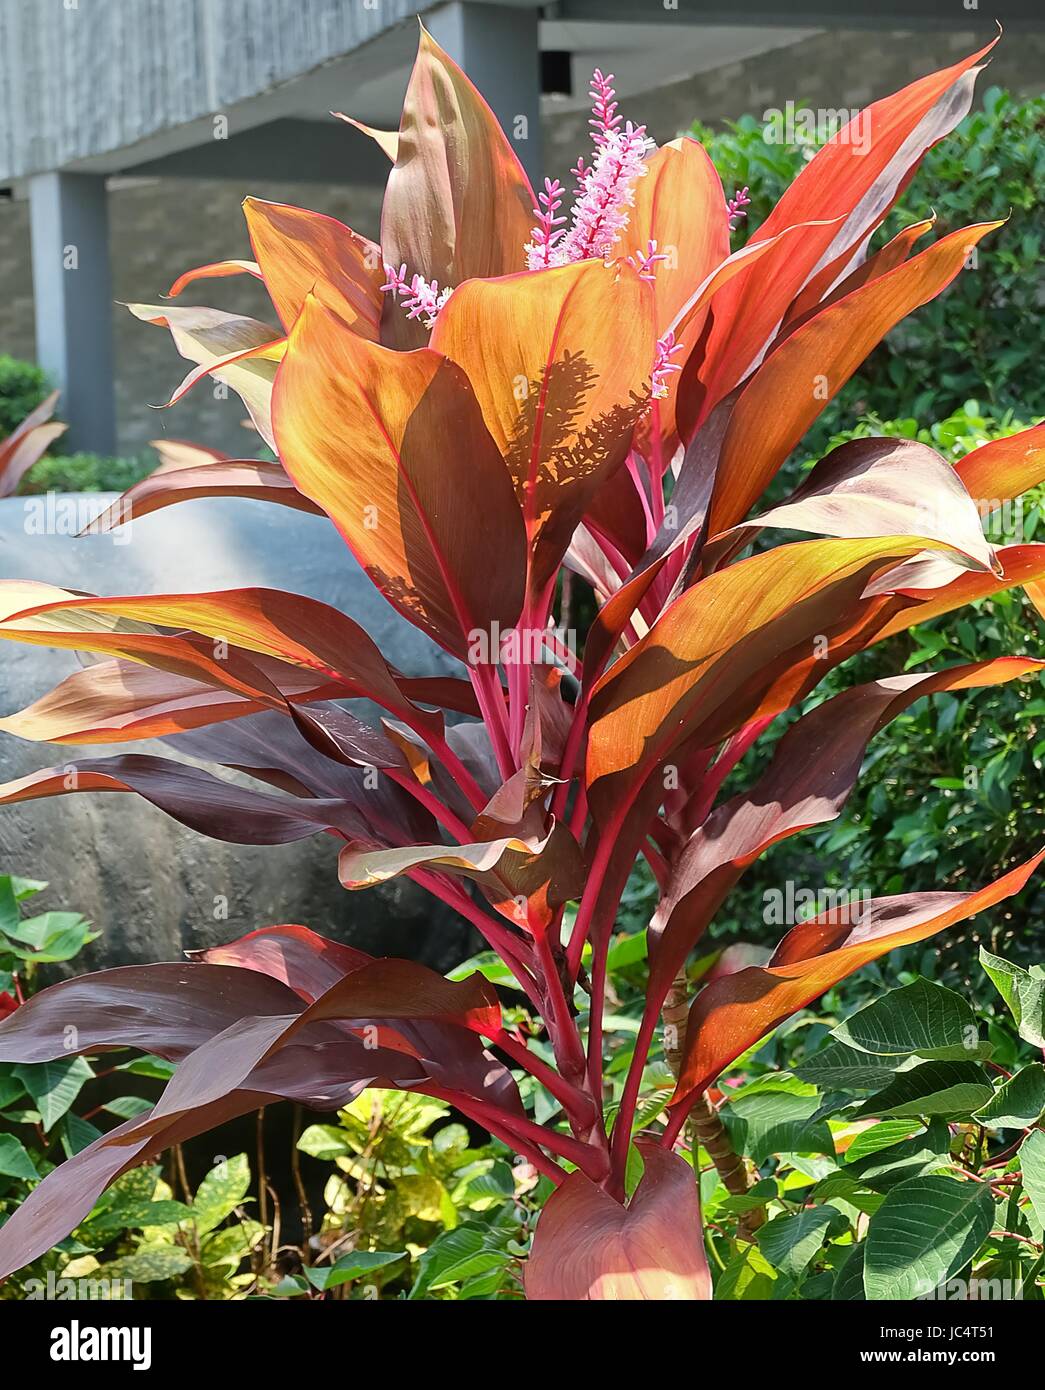 Beautiful Flower, Tropical Pink Cordyline Fruticos Flowers with Purple Leaves in A Garden. Stock Photo